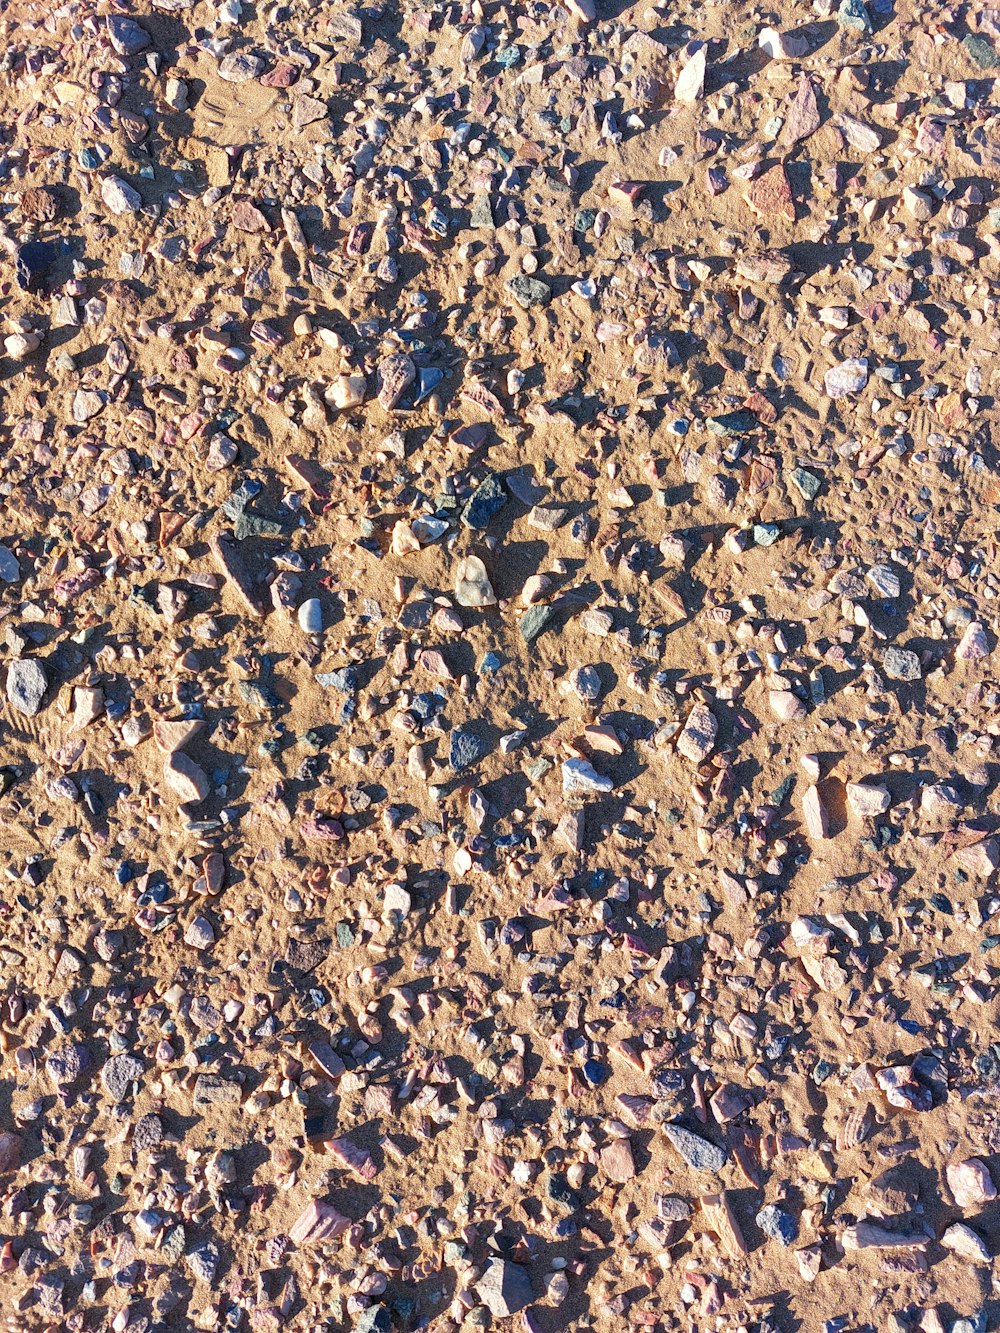 a close up of rocks and gravel on a ground